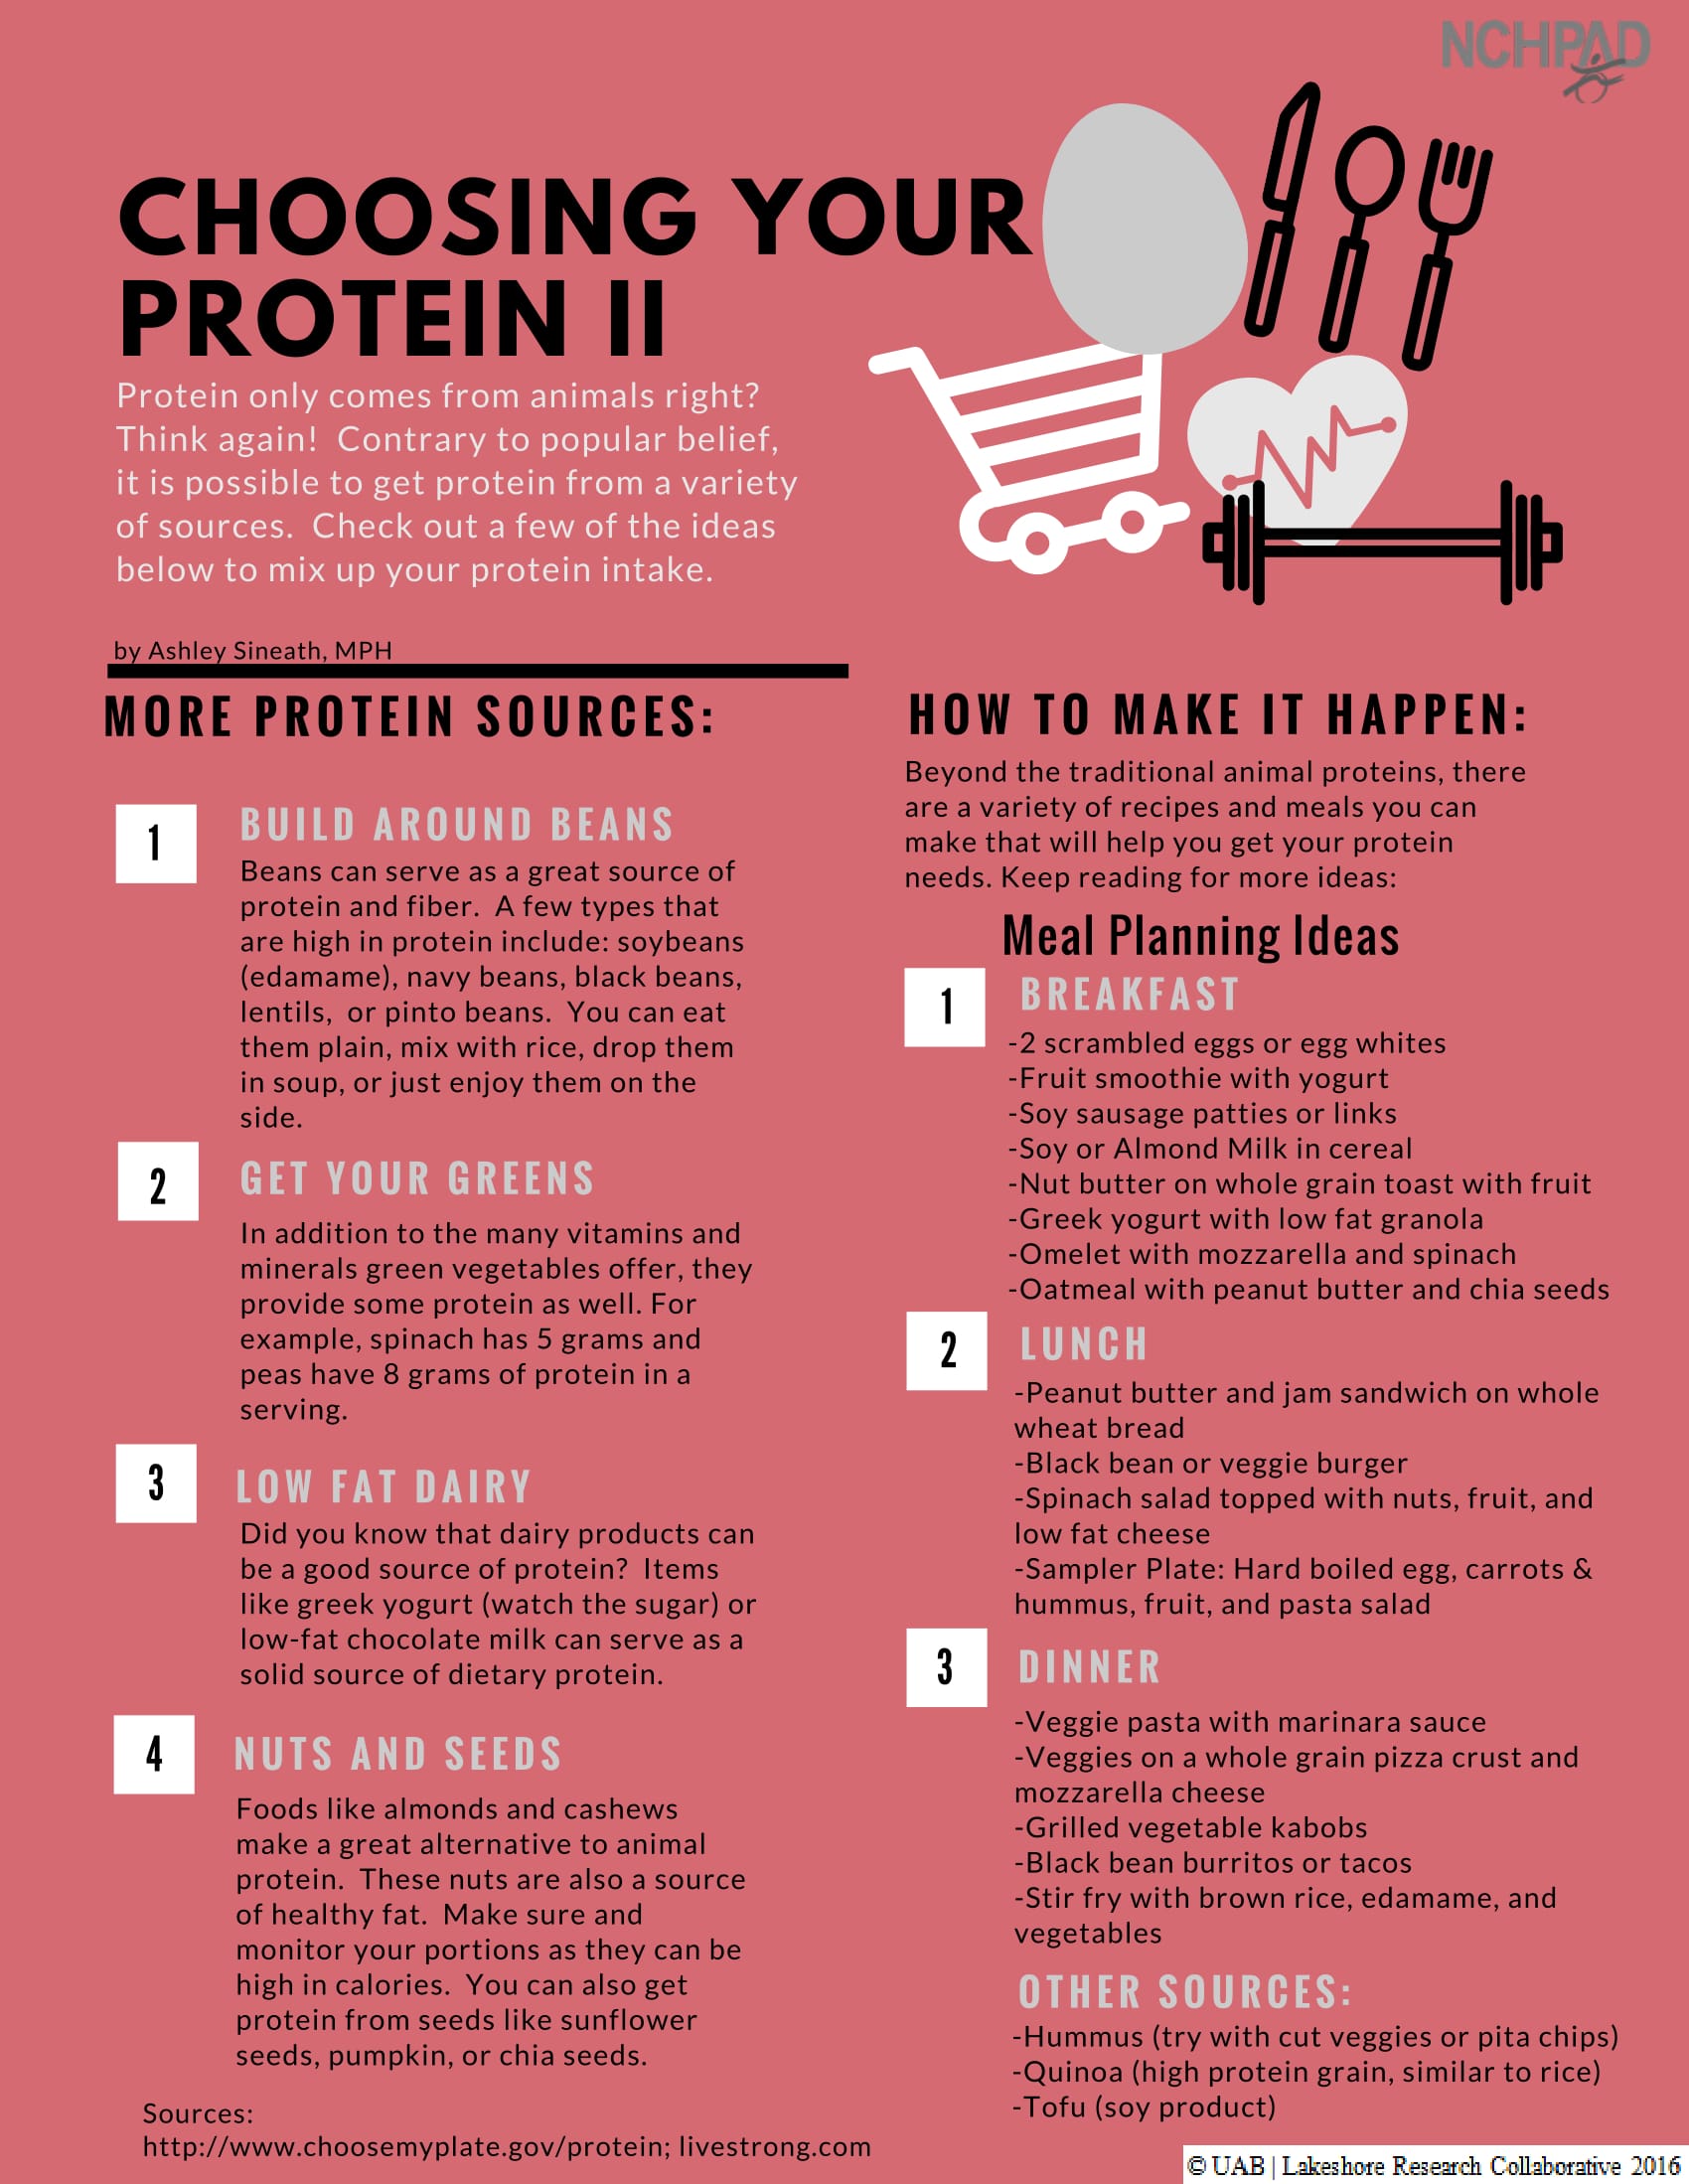 Choosing Your Protein : NCHPAD - Building Healthy Inclusive Communities